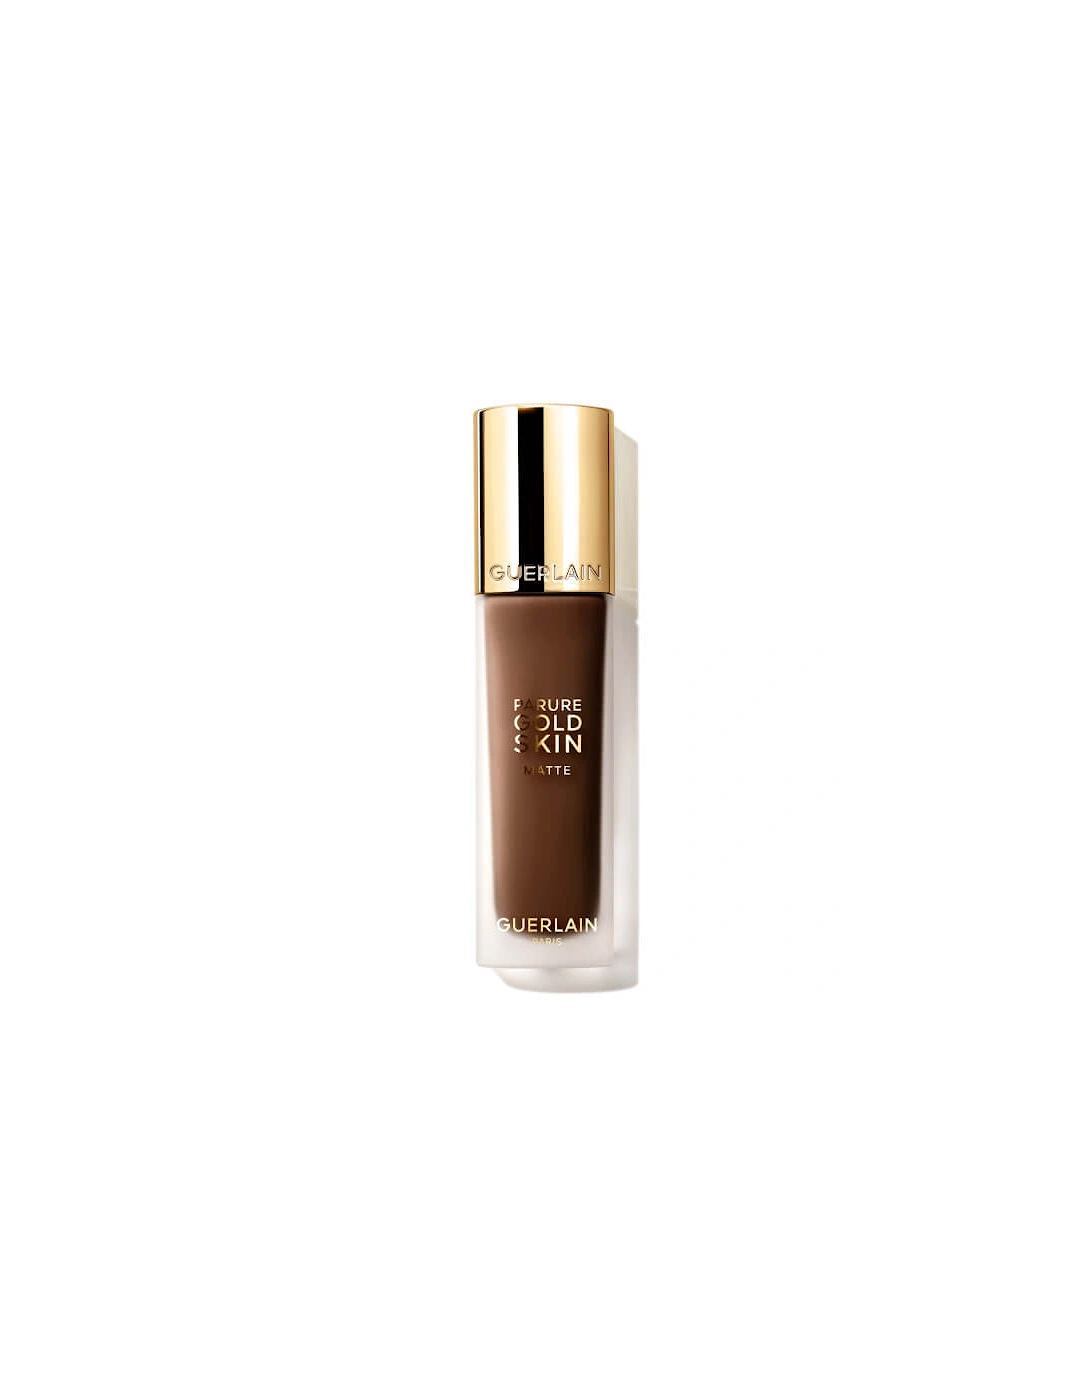 Parure Gold Skin 24H No-Transfer High Perfection Foundation - 8N Neutral / Neutre, 2 of 1